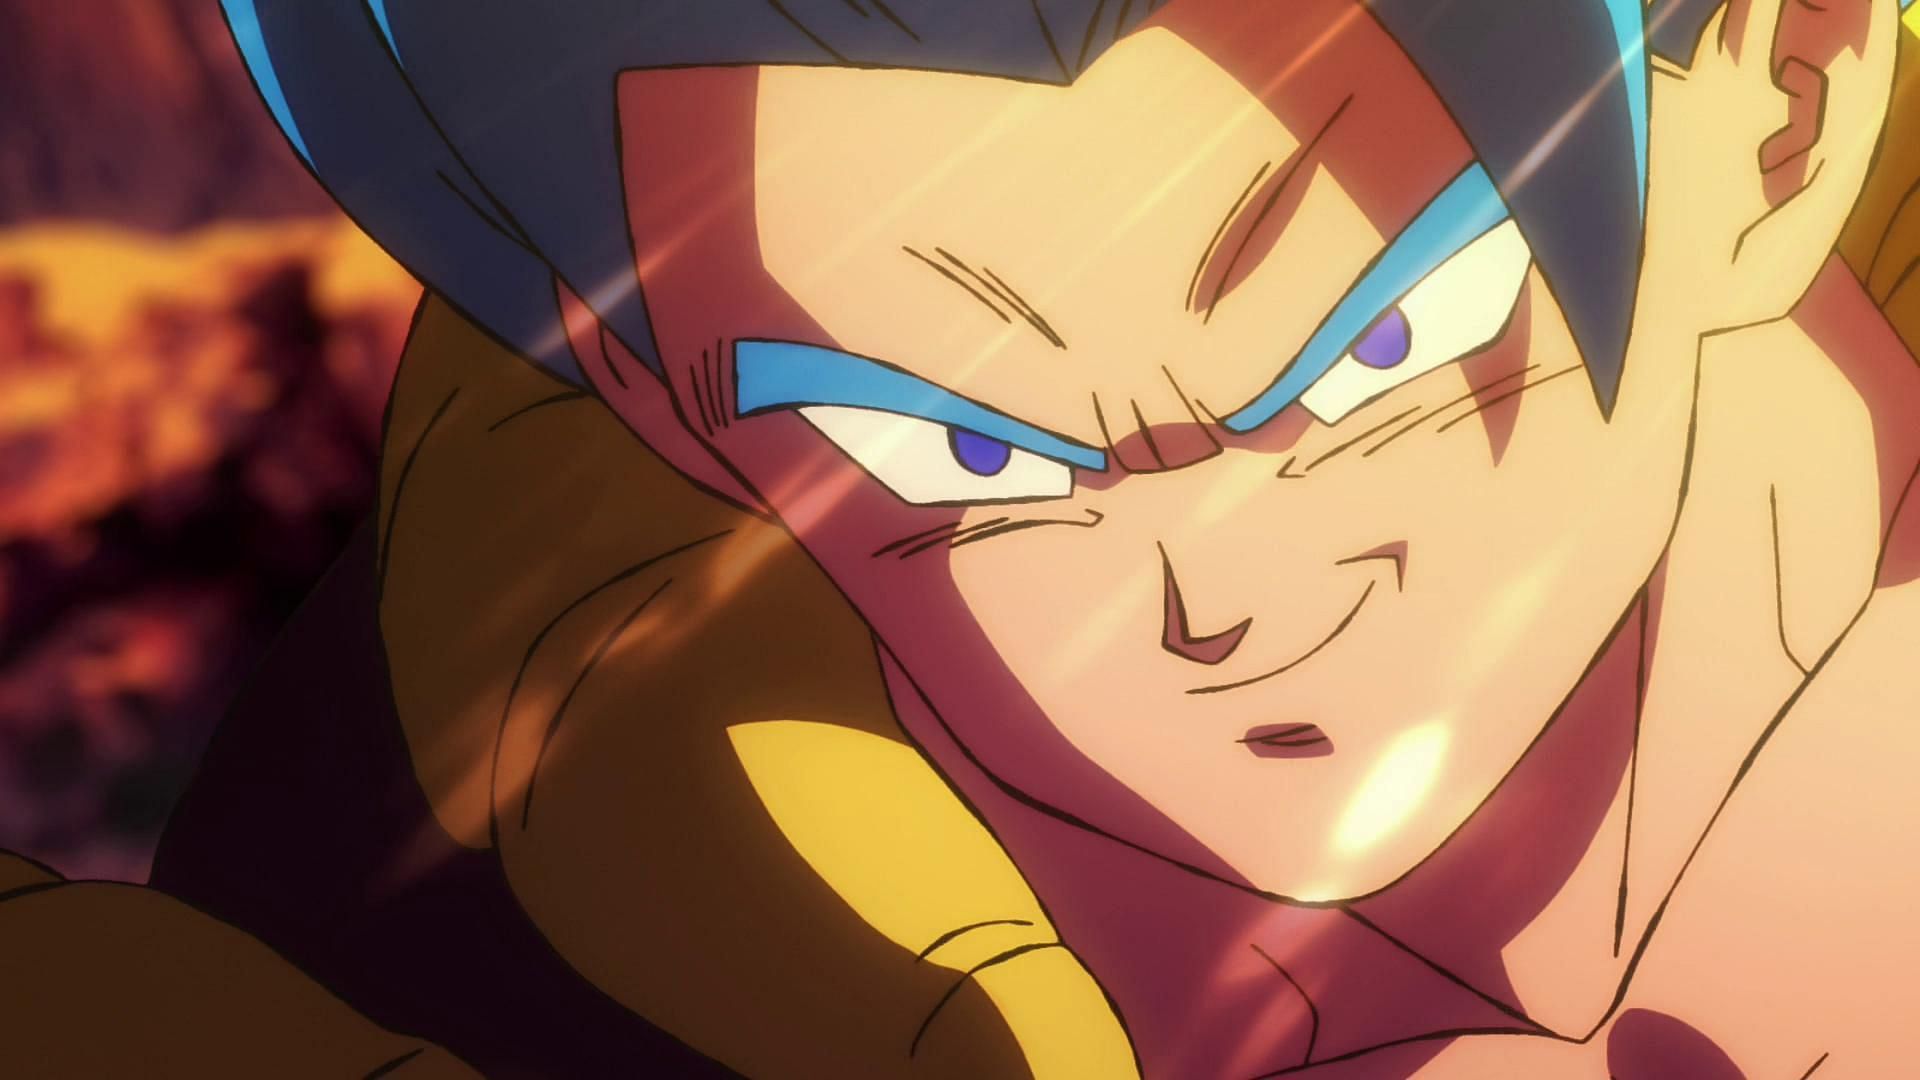 Gogeta smiling as shown in the anime (Image via Toei Animation)